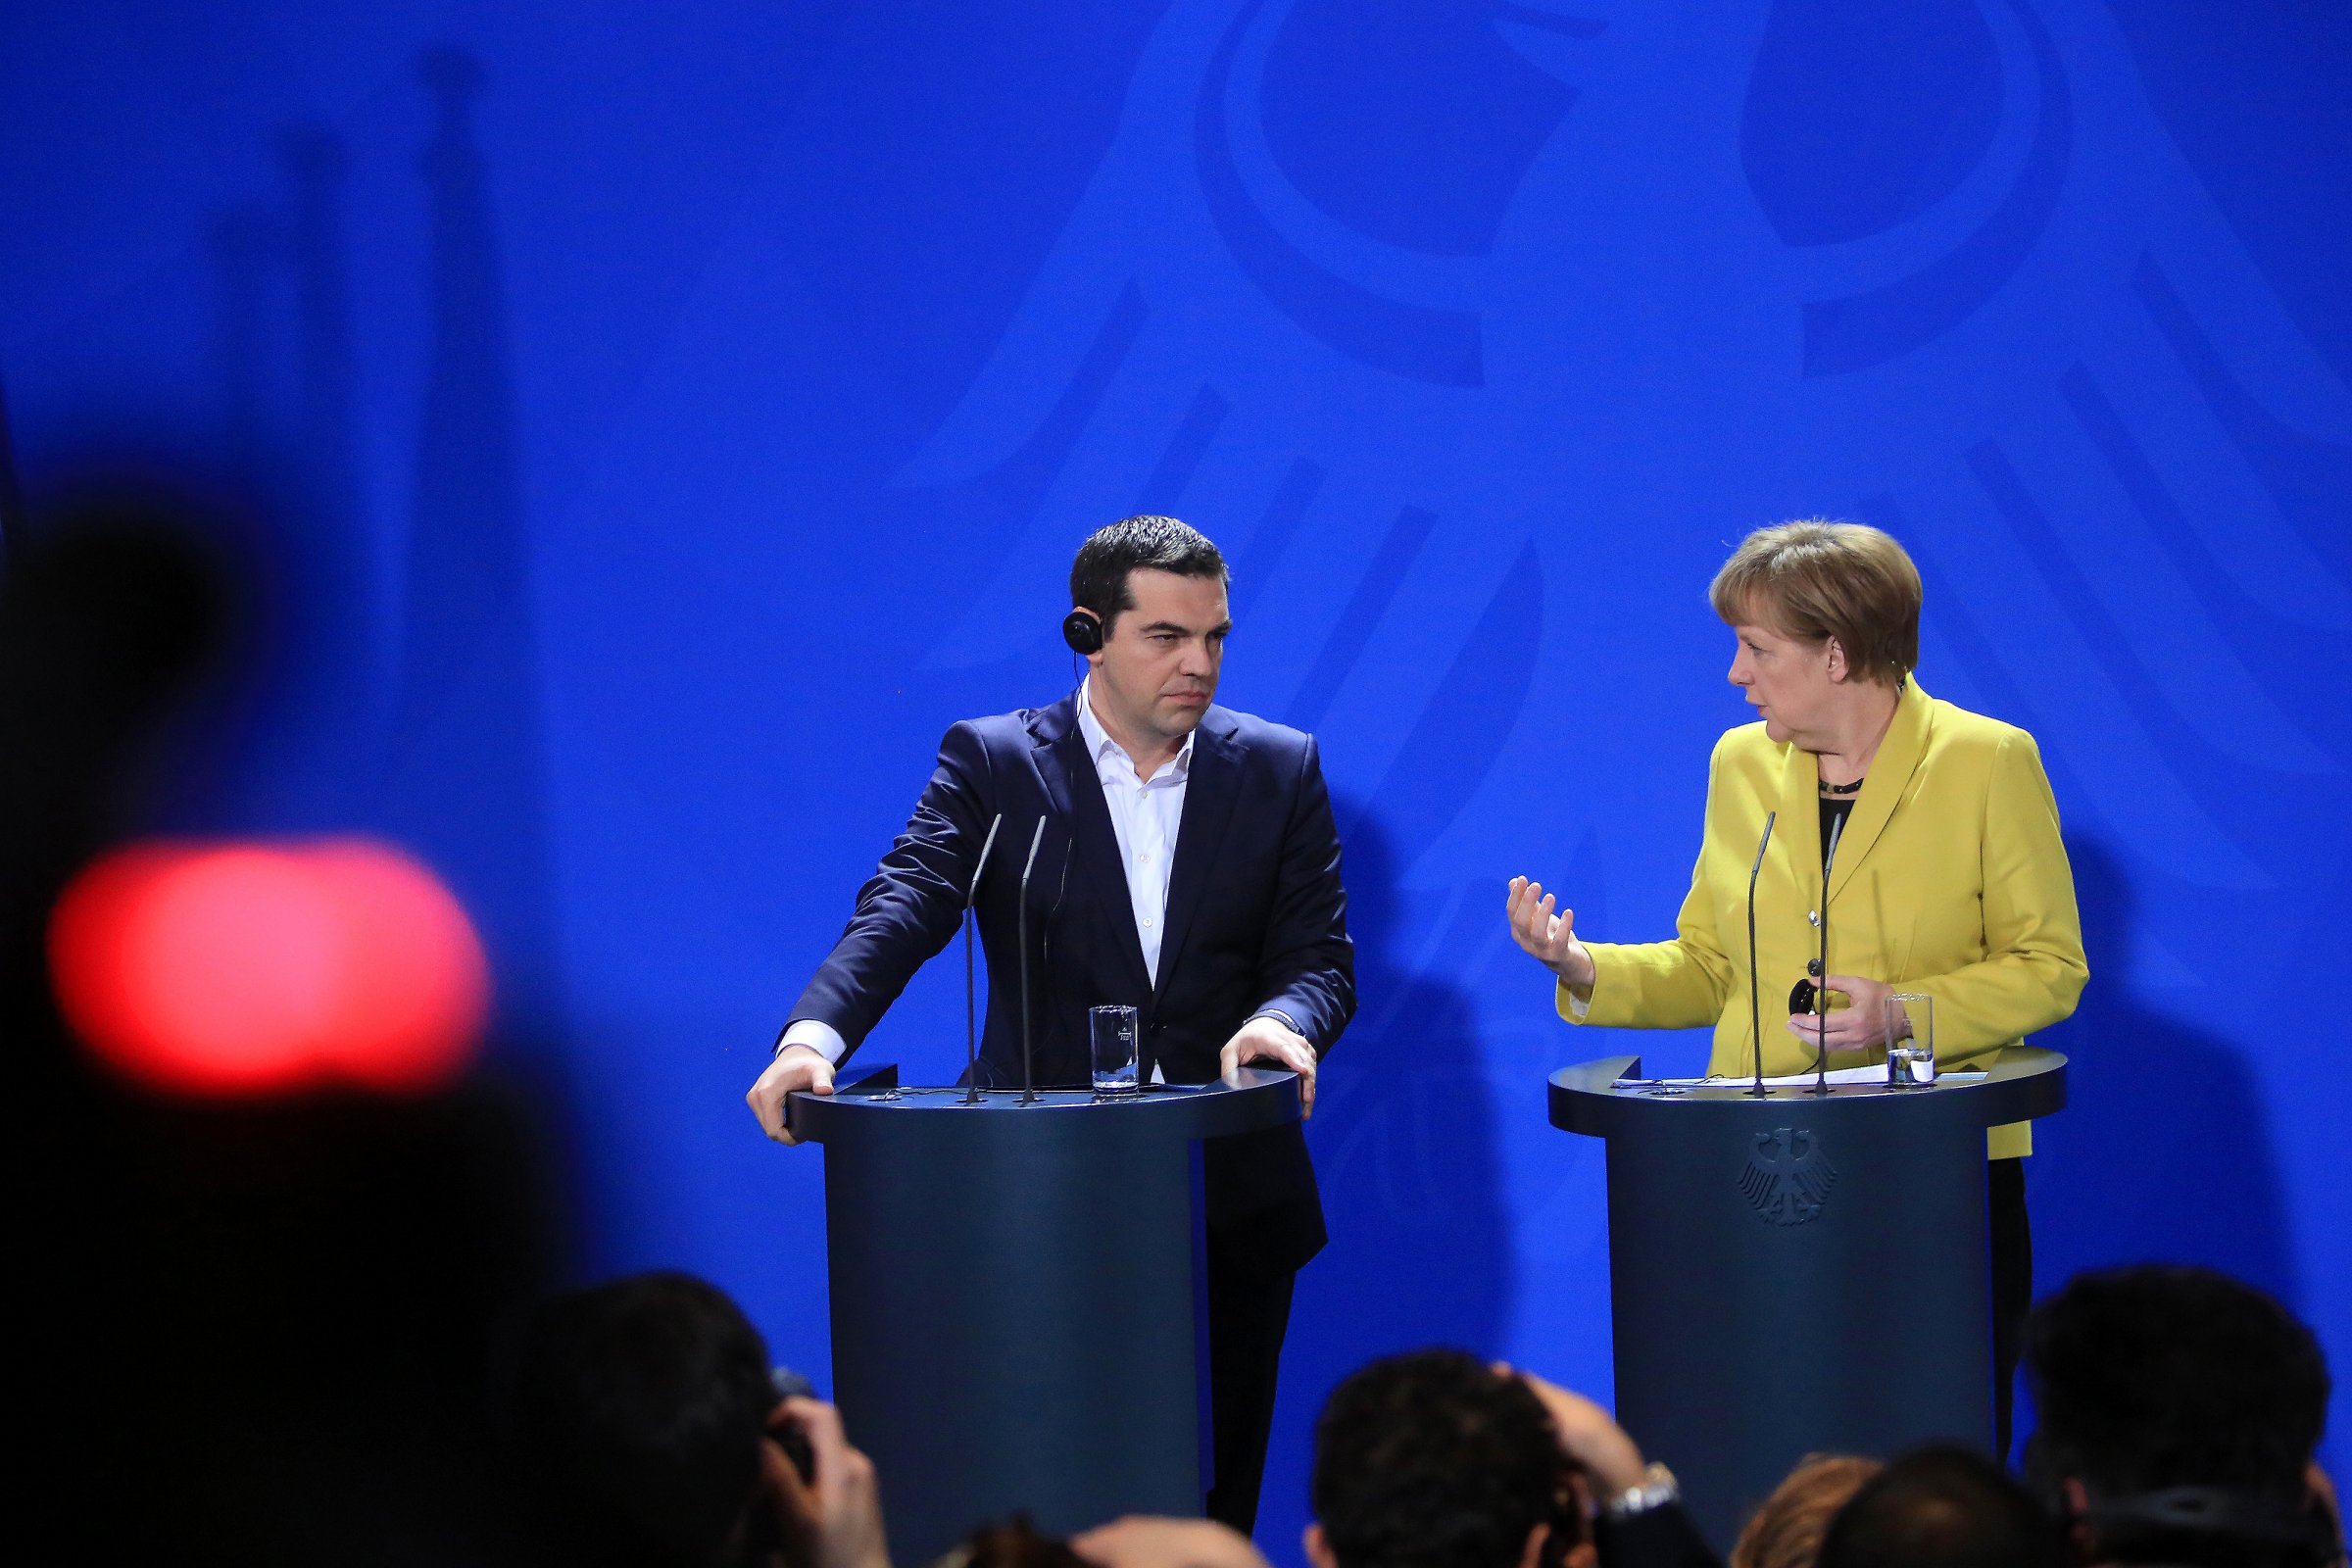 Greek Prime Minister Alexis Tsipras And German Chancellor Angela Merkel News Conference